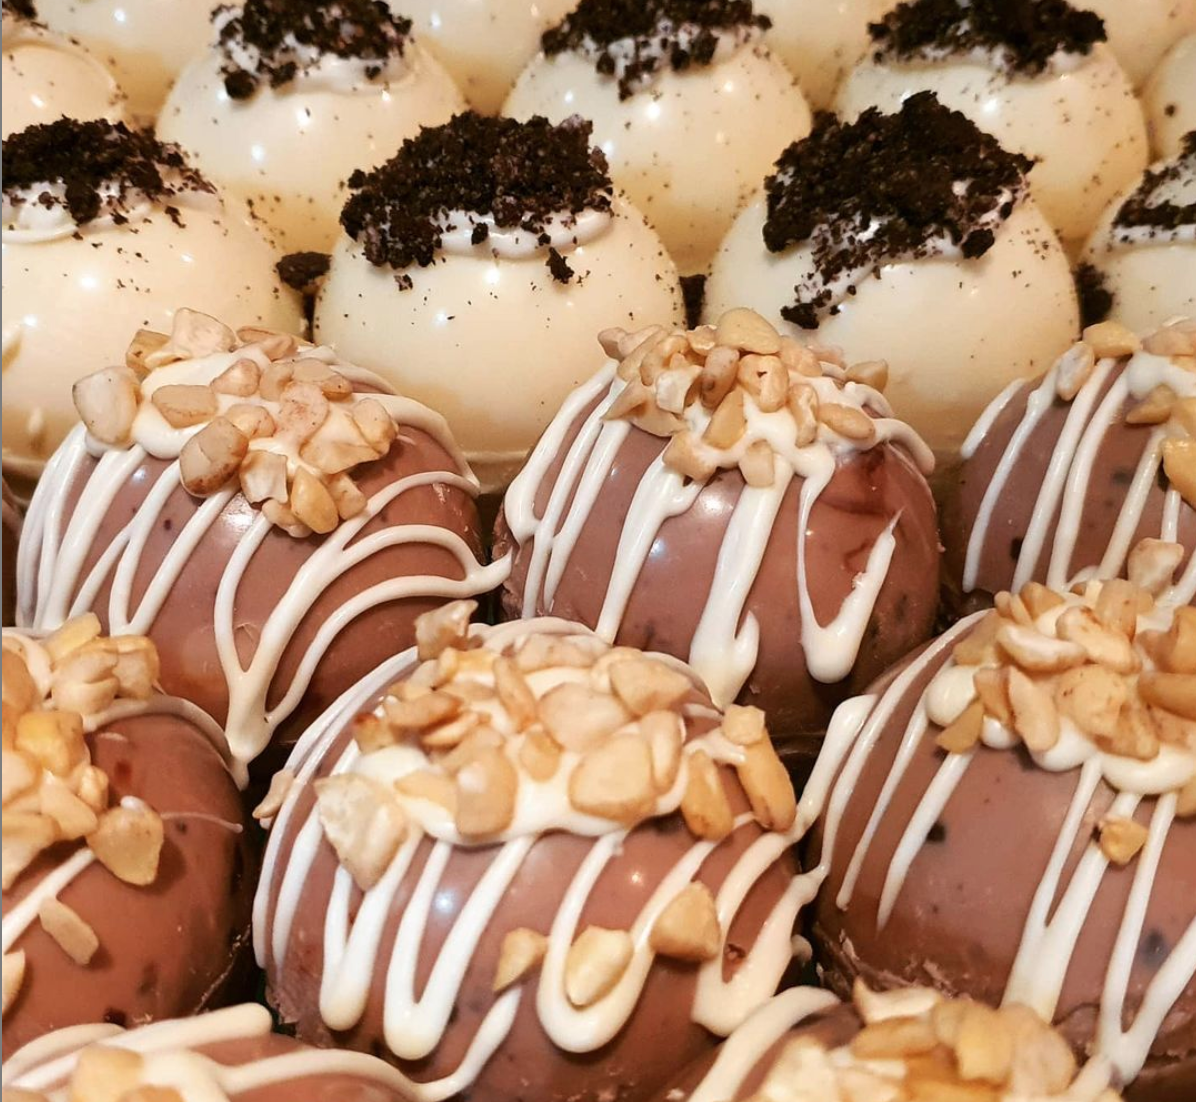 Cheese Pie Chocolate Bombs From Home Kitchens Inquirer Lifestyle